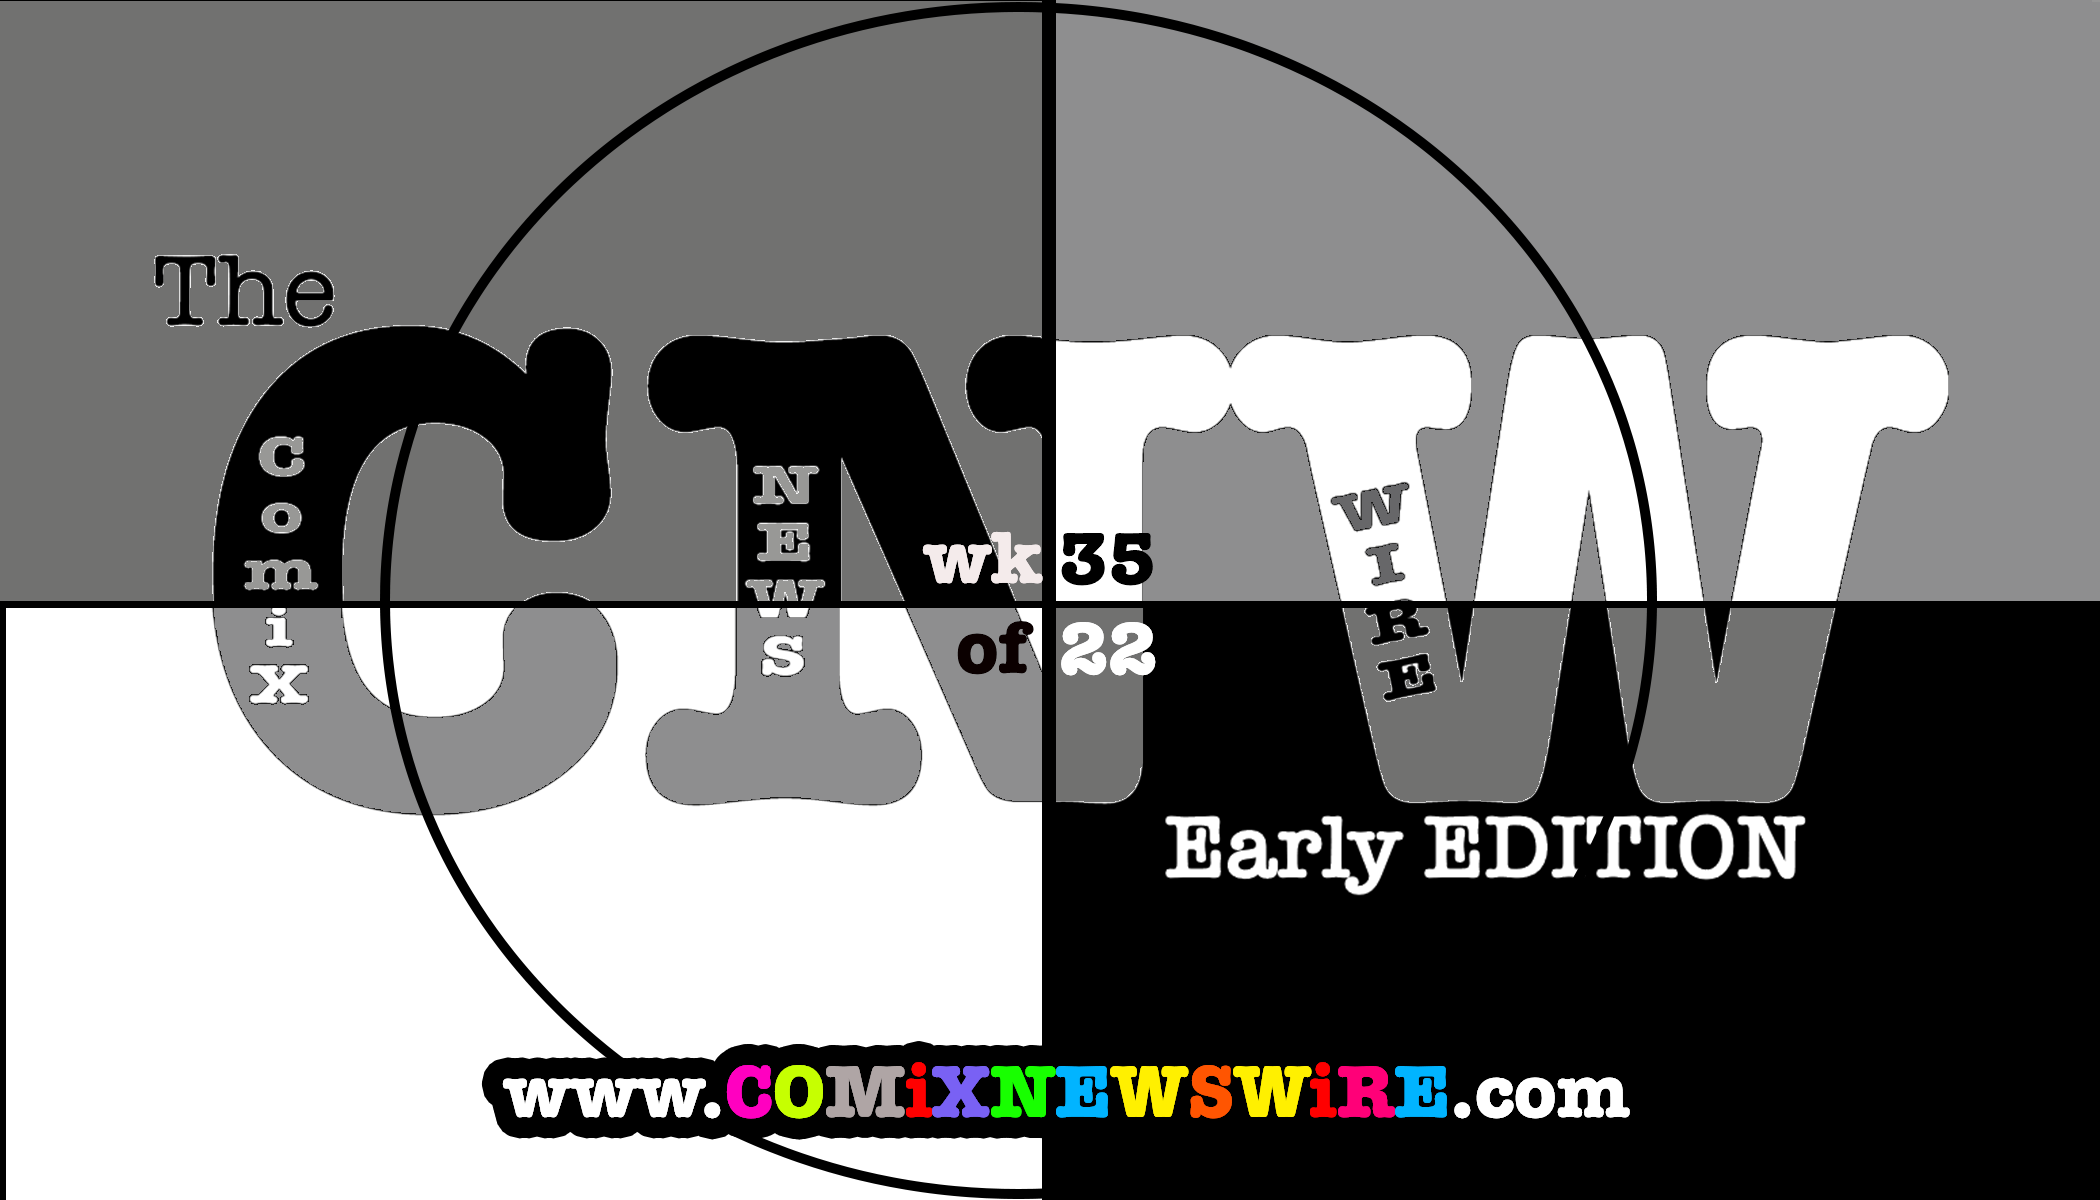 CNW EARLY EDITION wk35of22 – 8/29-9/4/22